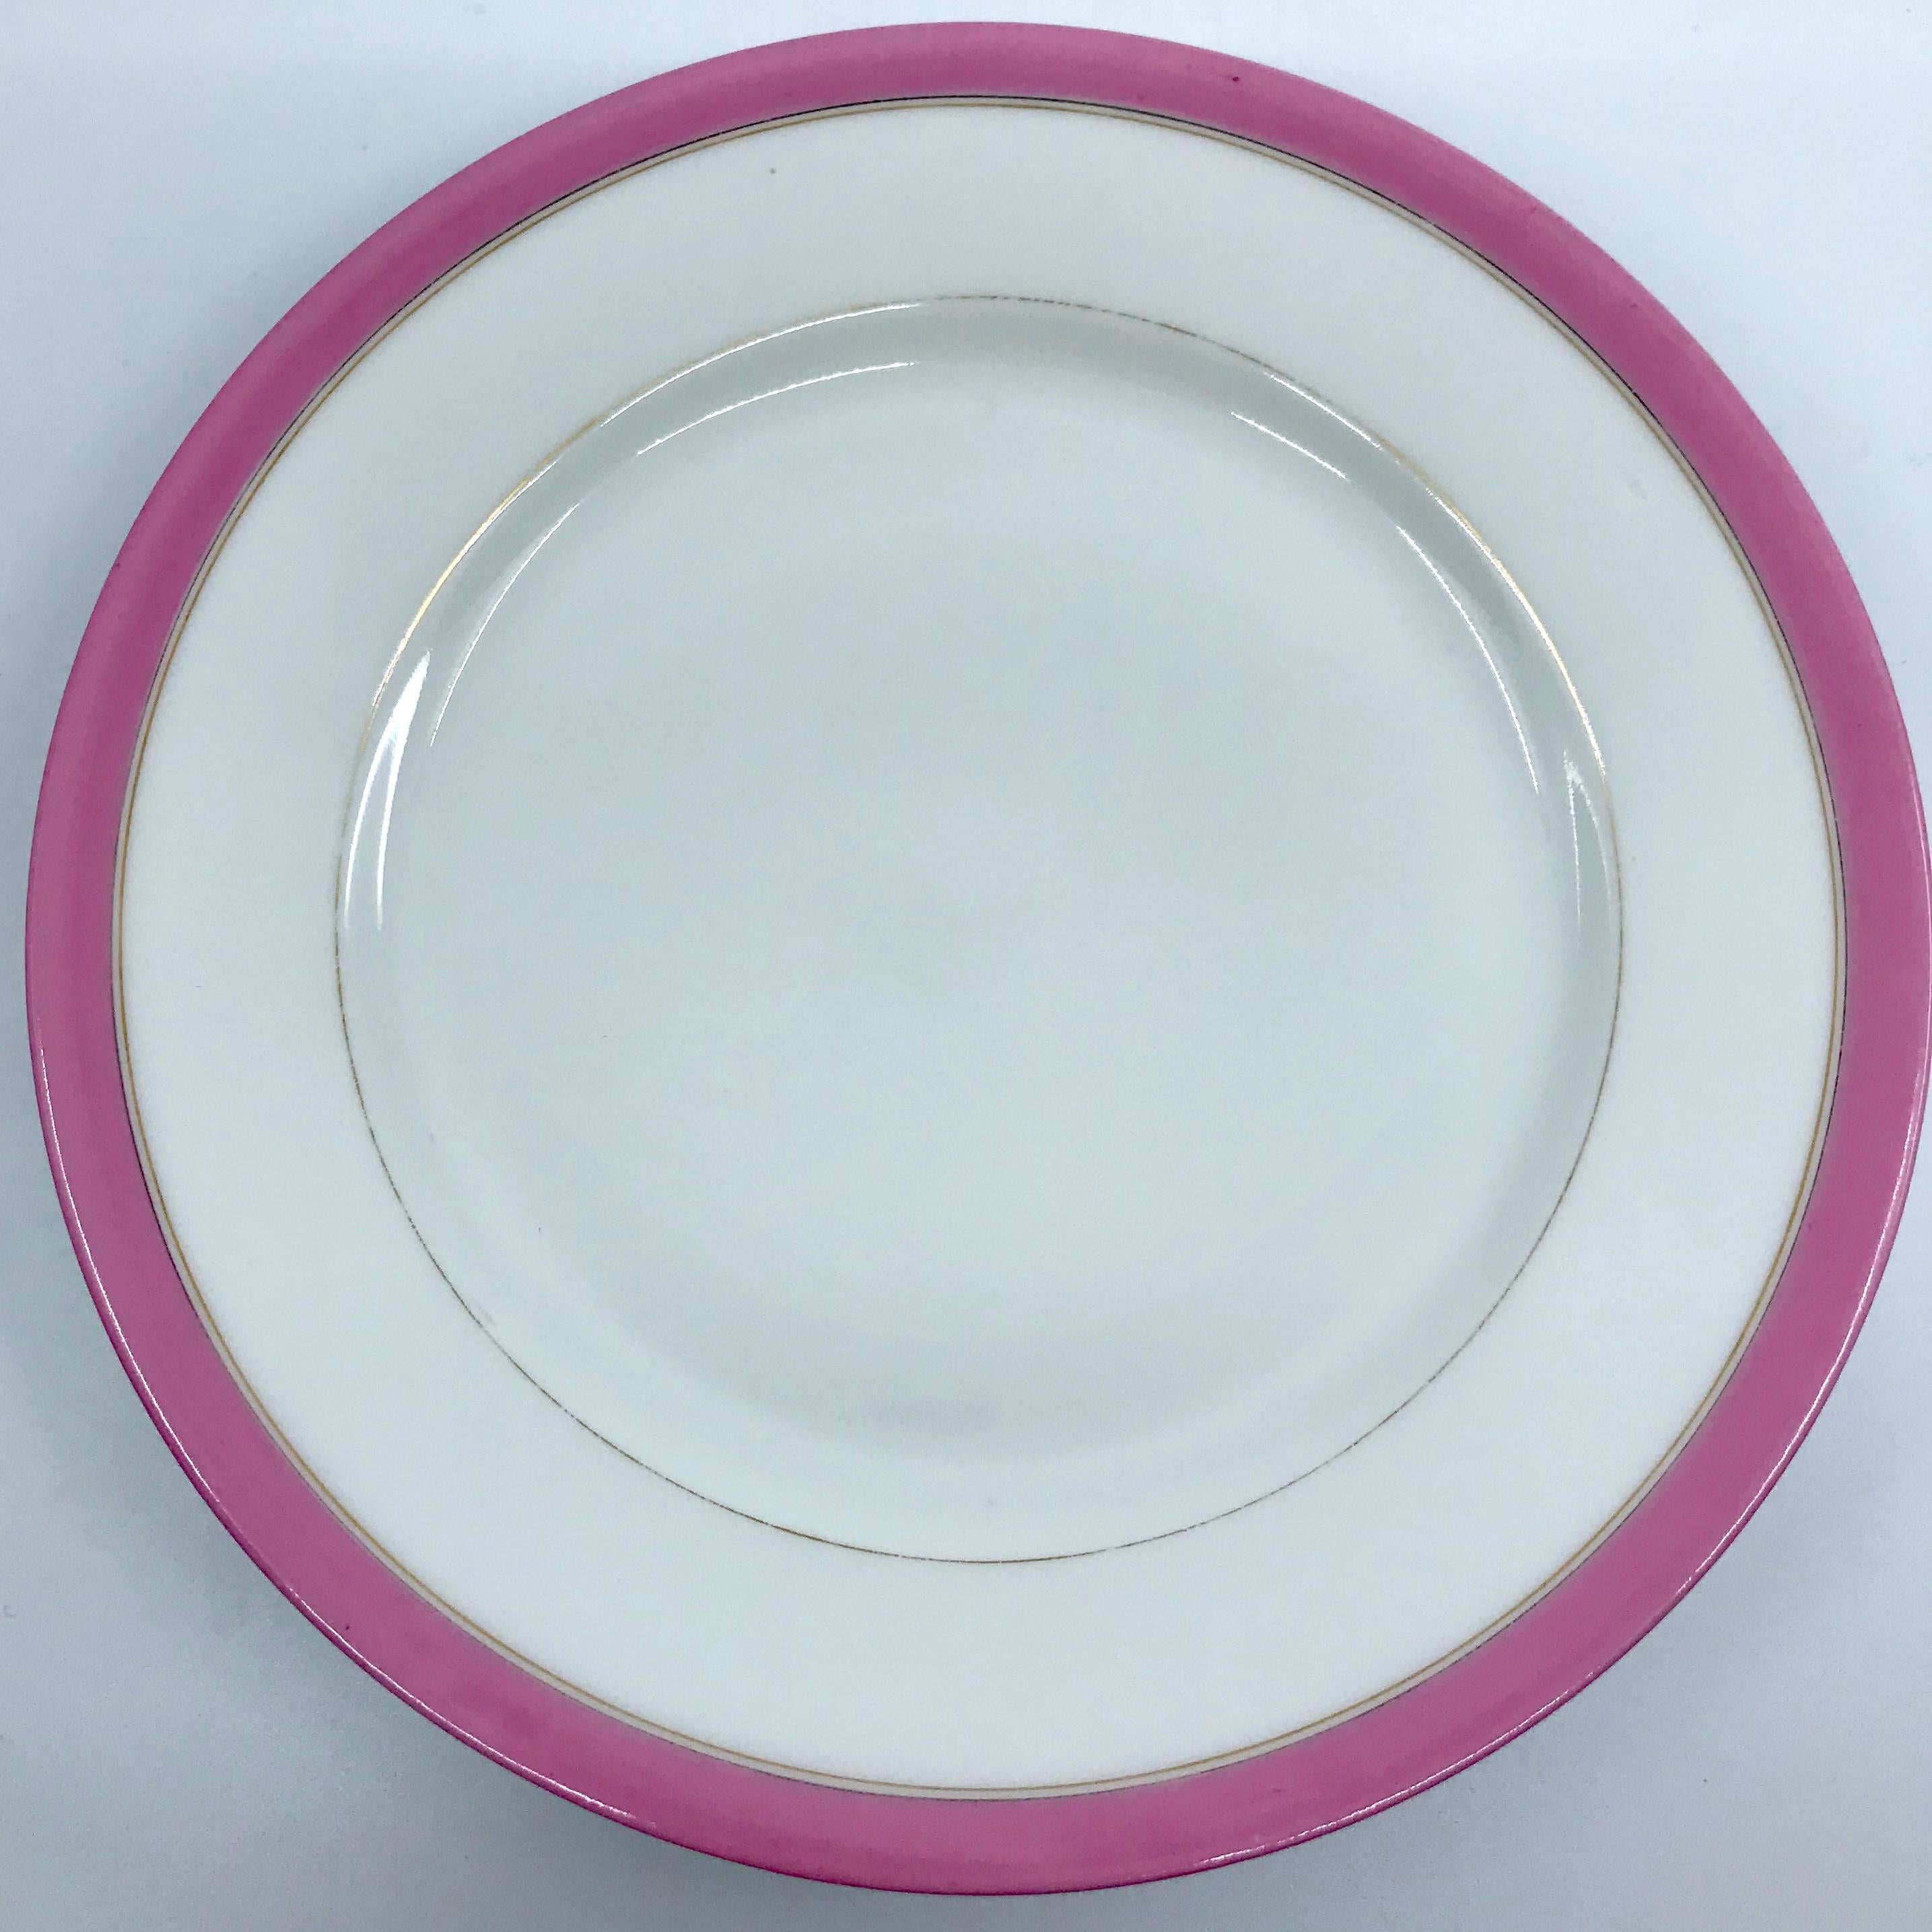 Set of four French pink and gilt banded plates. Dessert plates with white ground bordered with a pale pink band and gilt rims, France, early 20th century.
Dimensions: 7.88